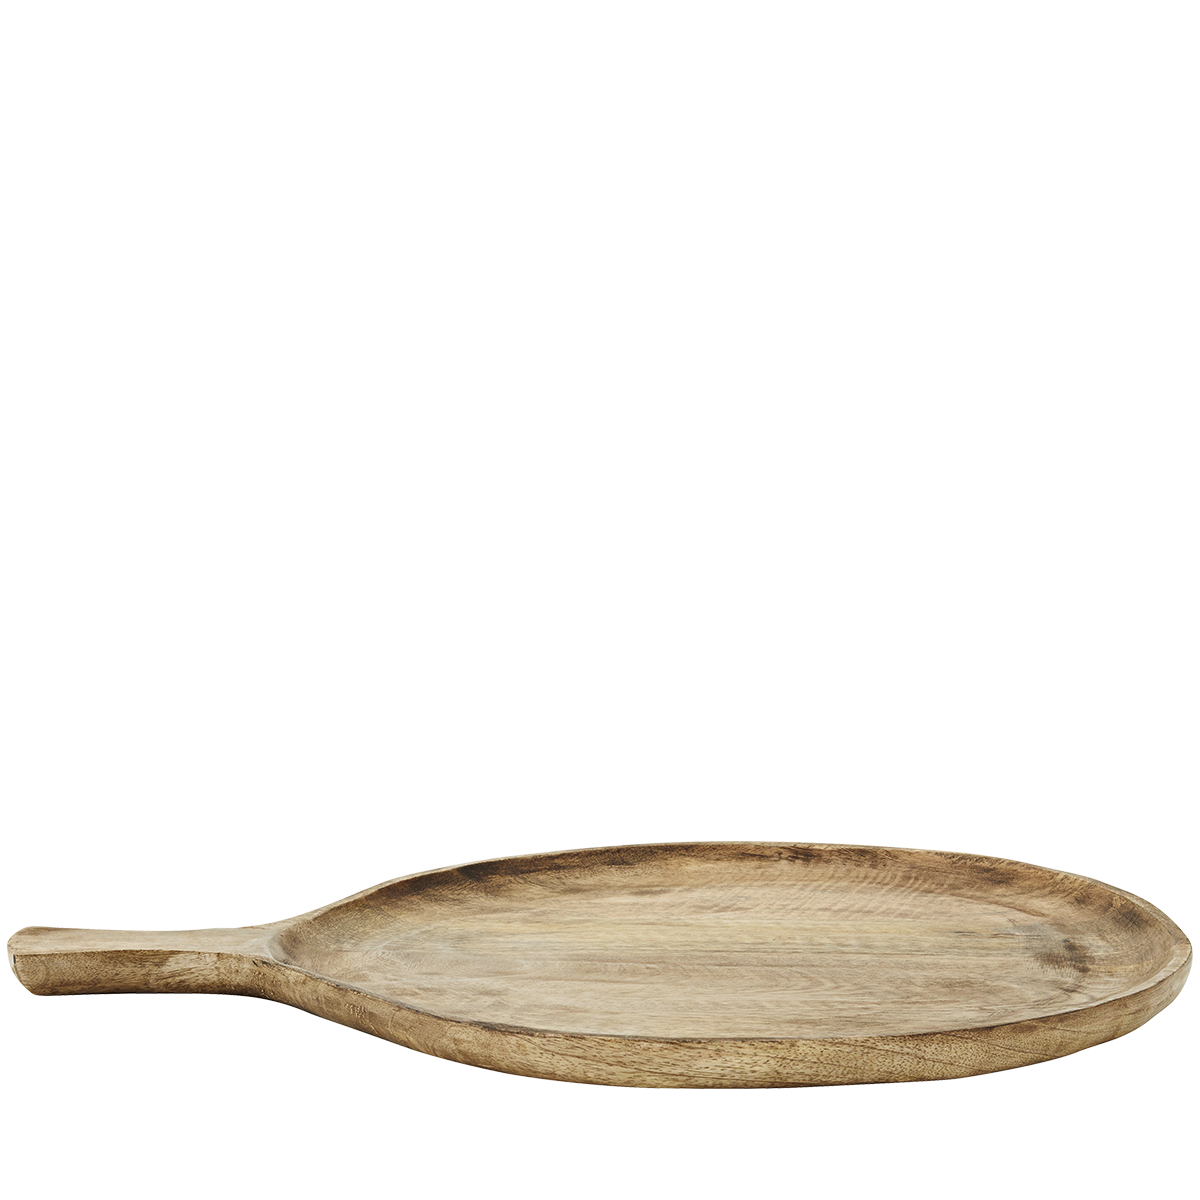 Wooden serving dish